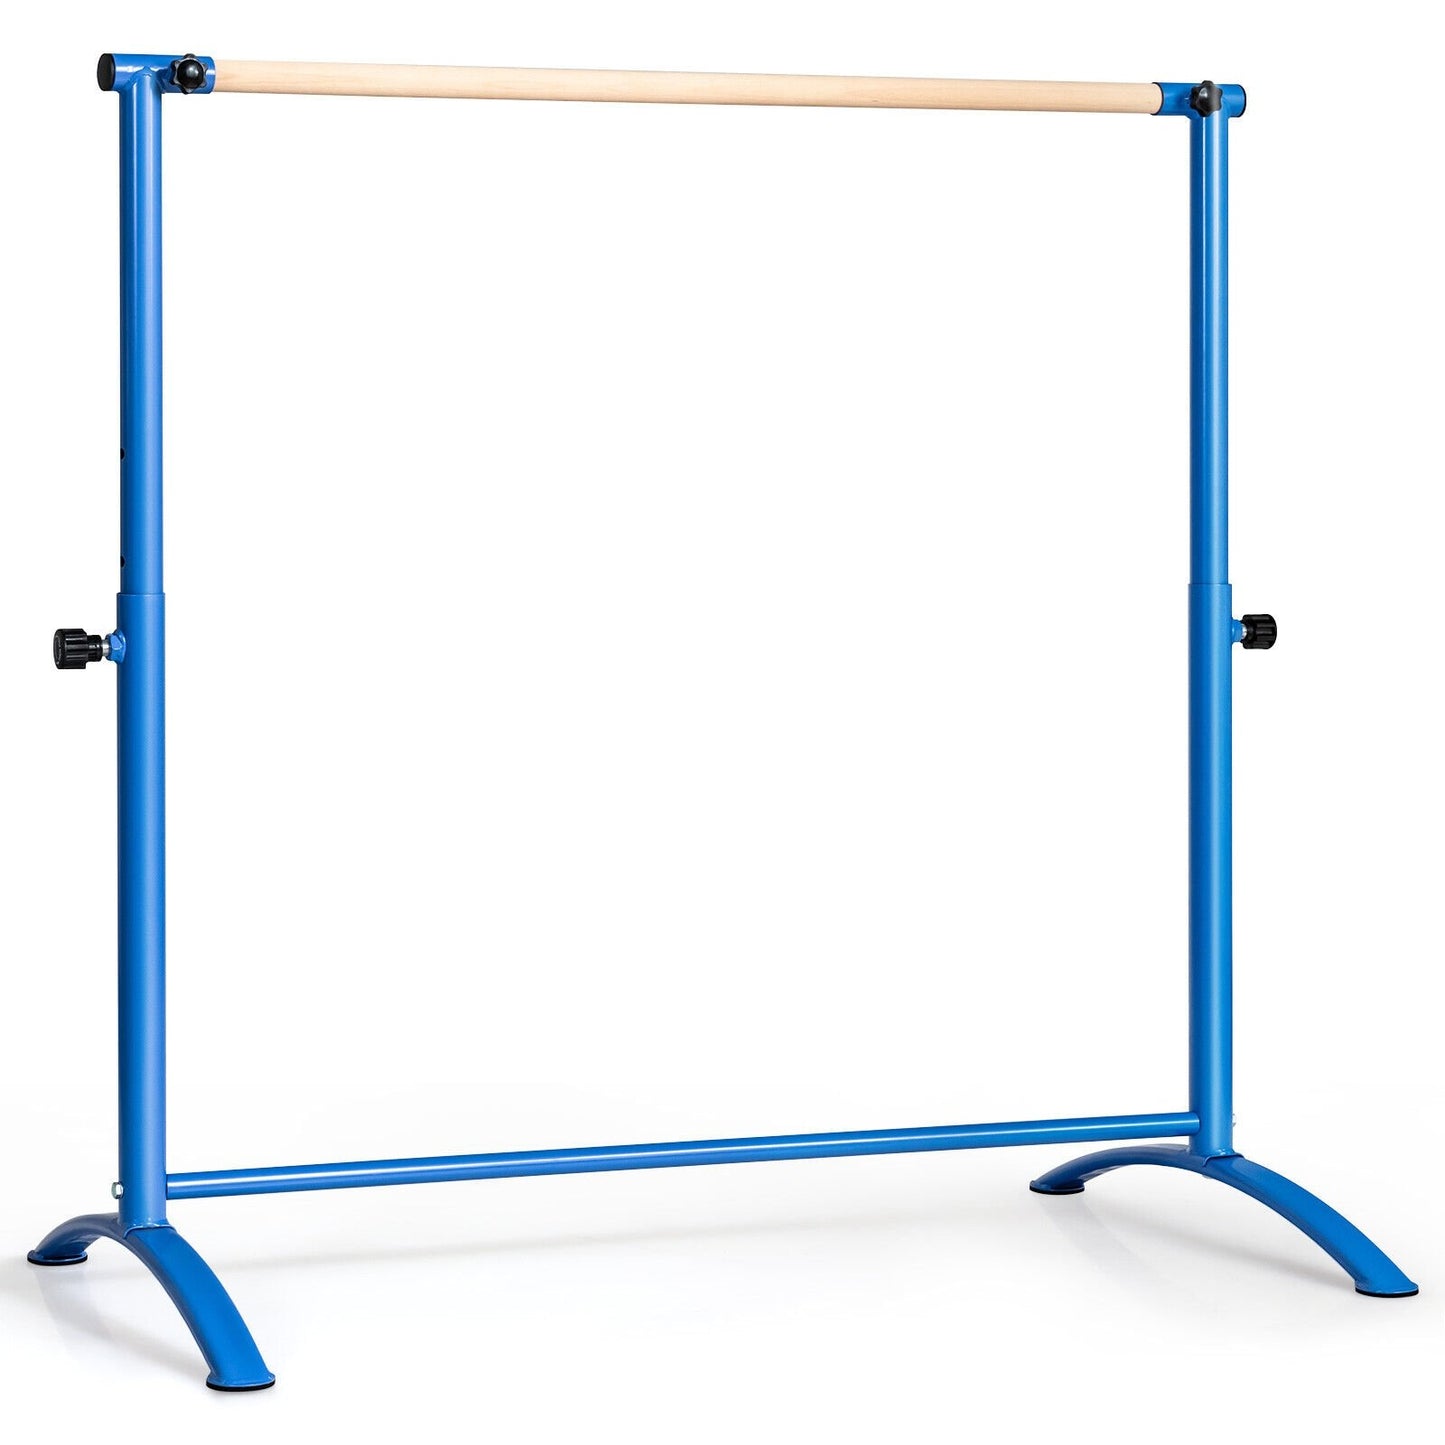 51 Inch Ballet Barre Bar with 4-Position Adjustable Height, Blue